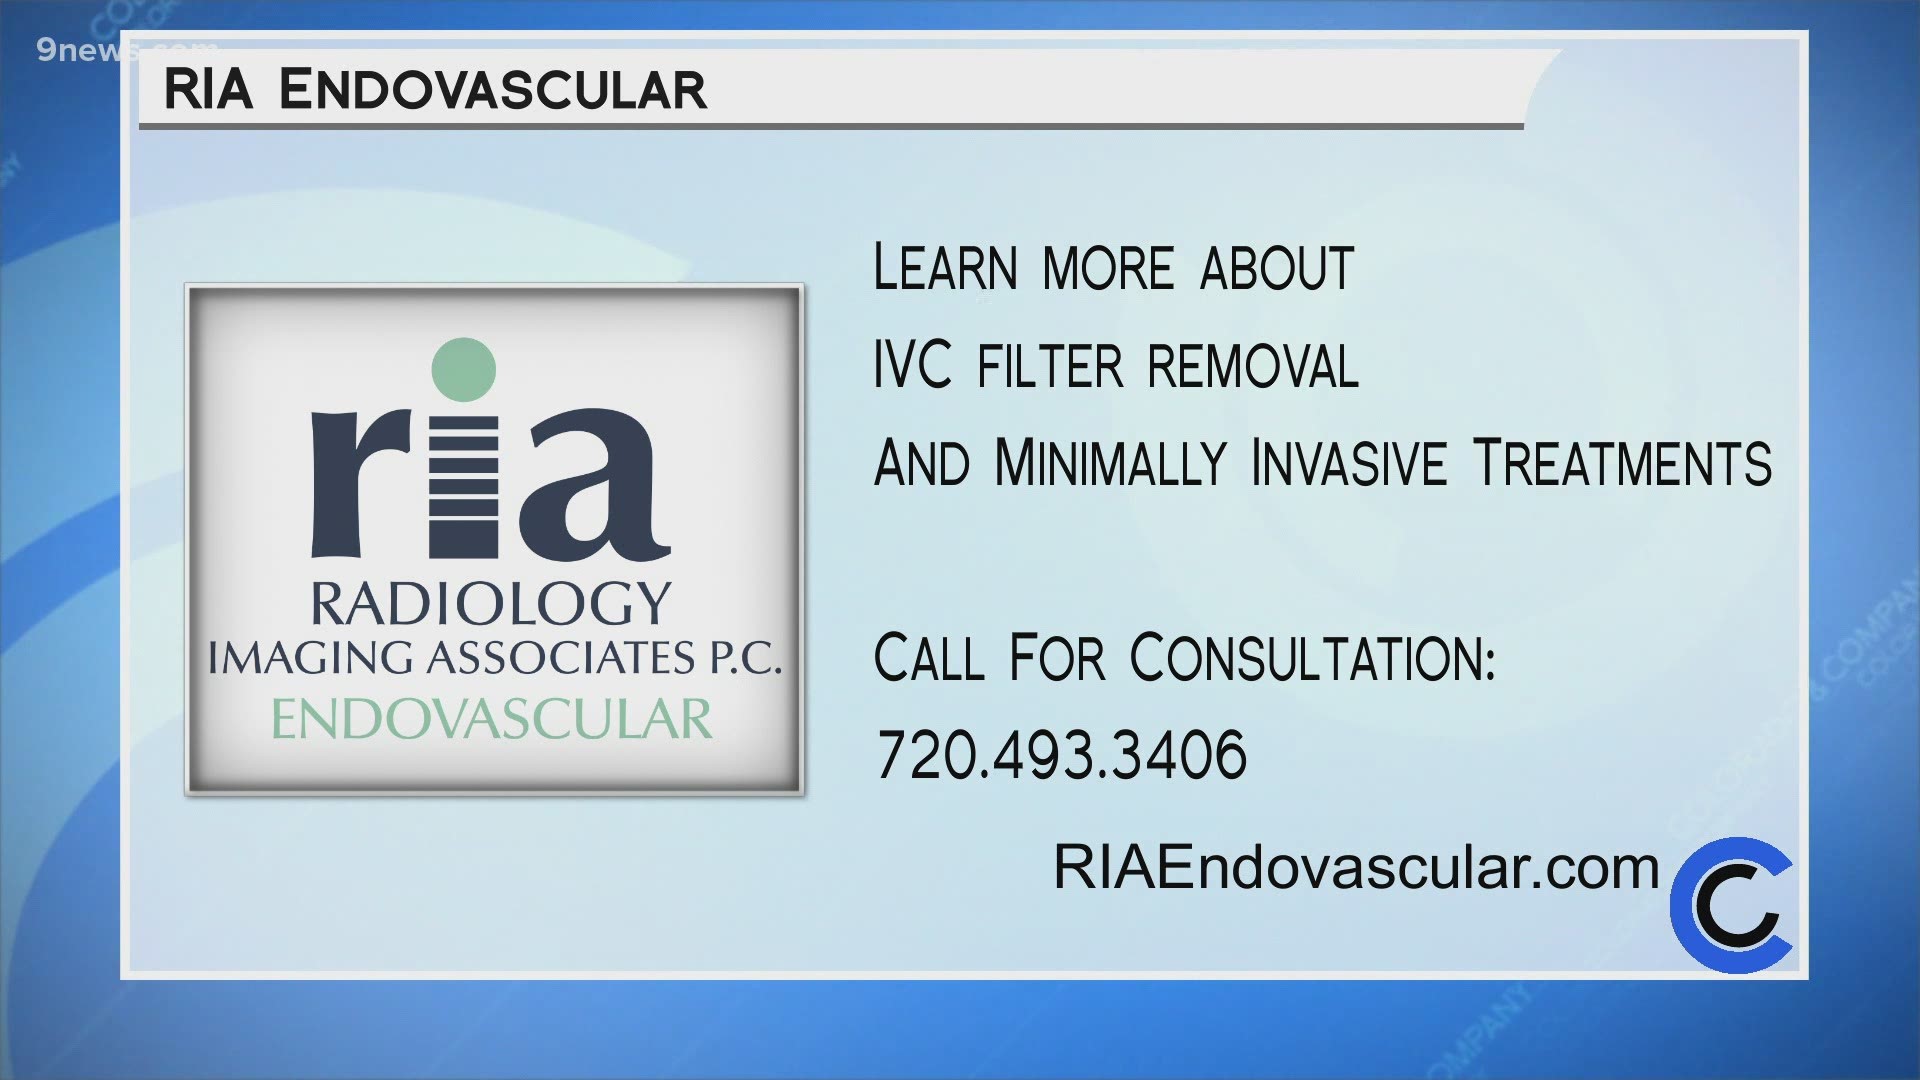 The doctors at RIA Endovascular are trusted, renowned and use minimally invasive treatments. Call 720.493.3406 or visit RIAEndovascular.com to learn your options.